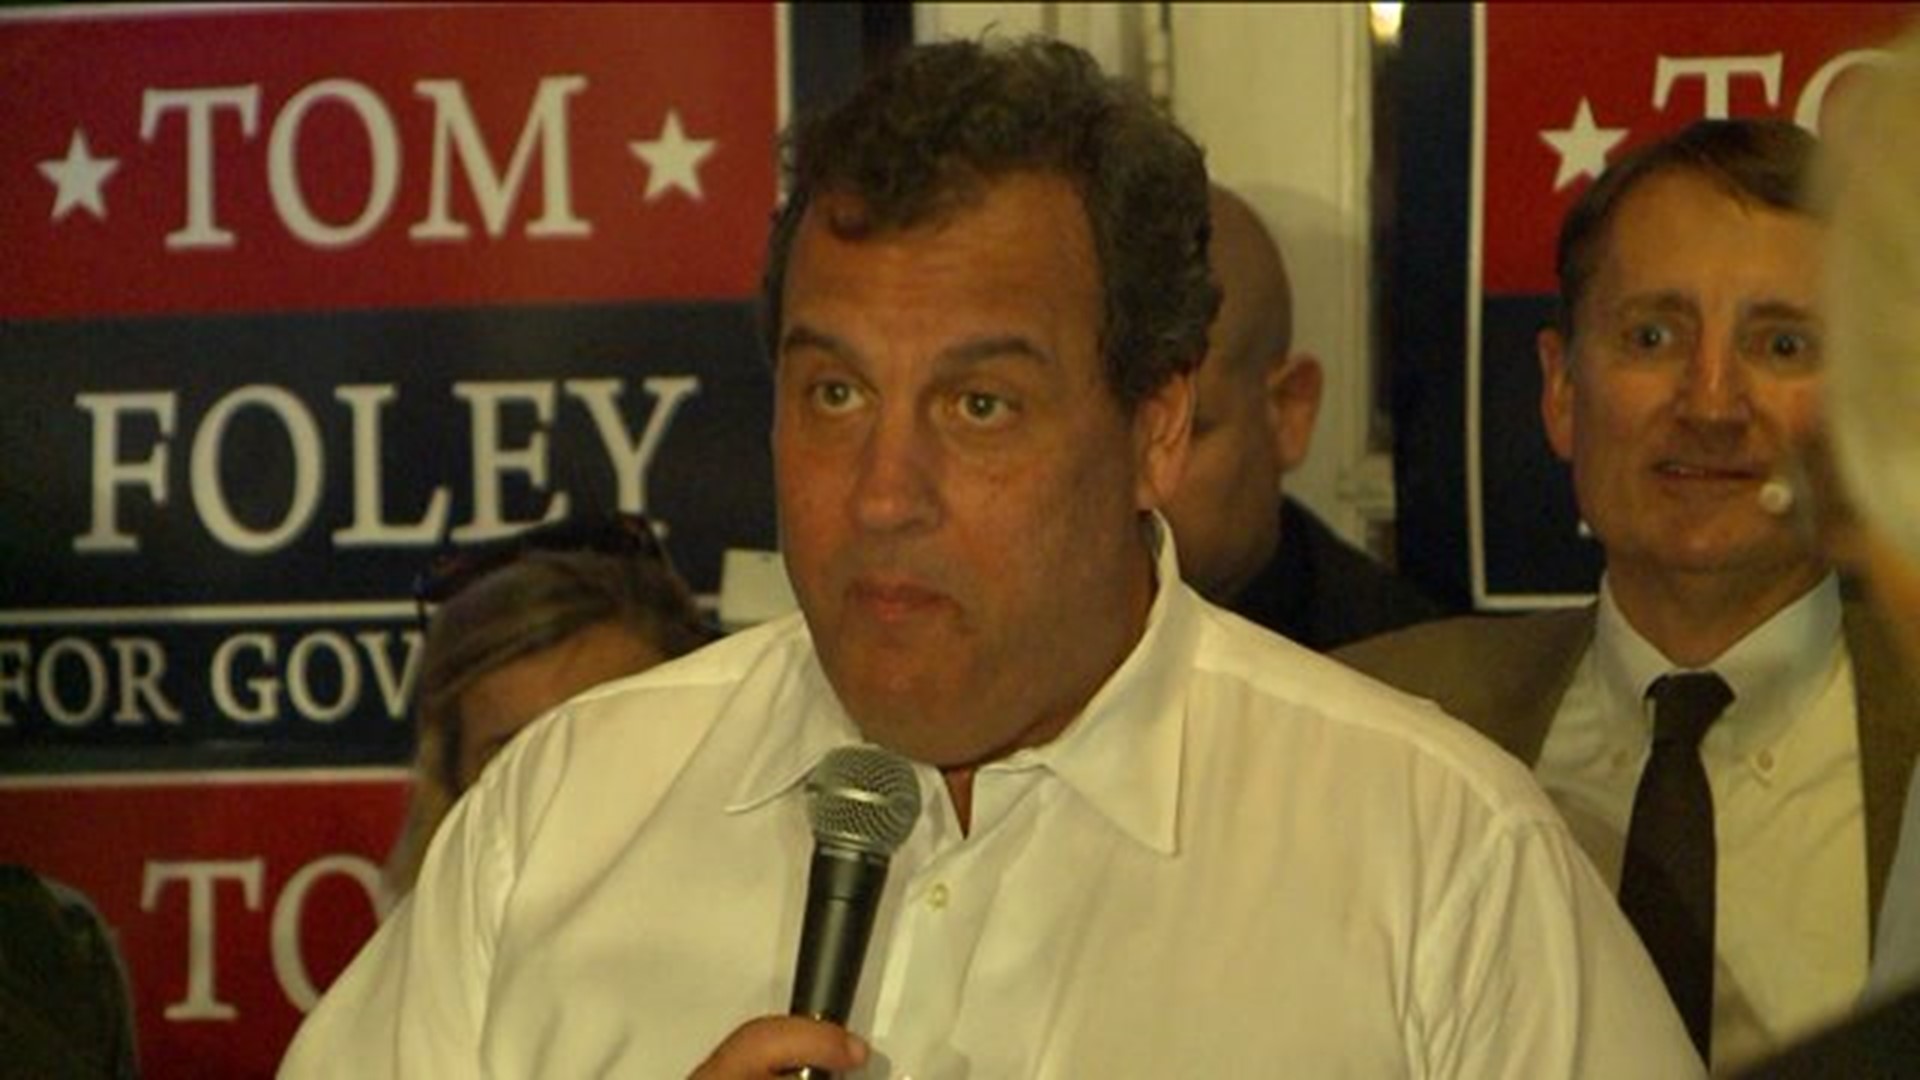 Christie stumps for Foley in Groton